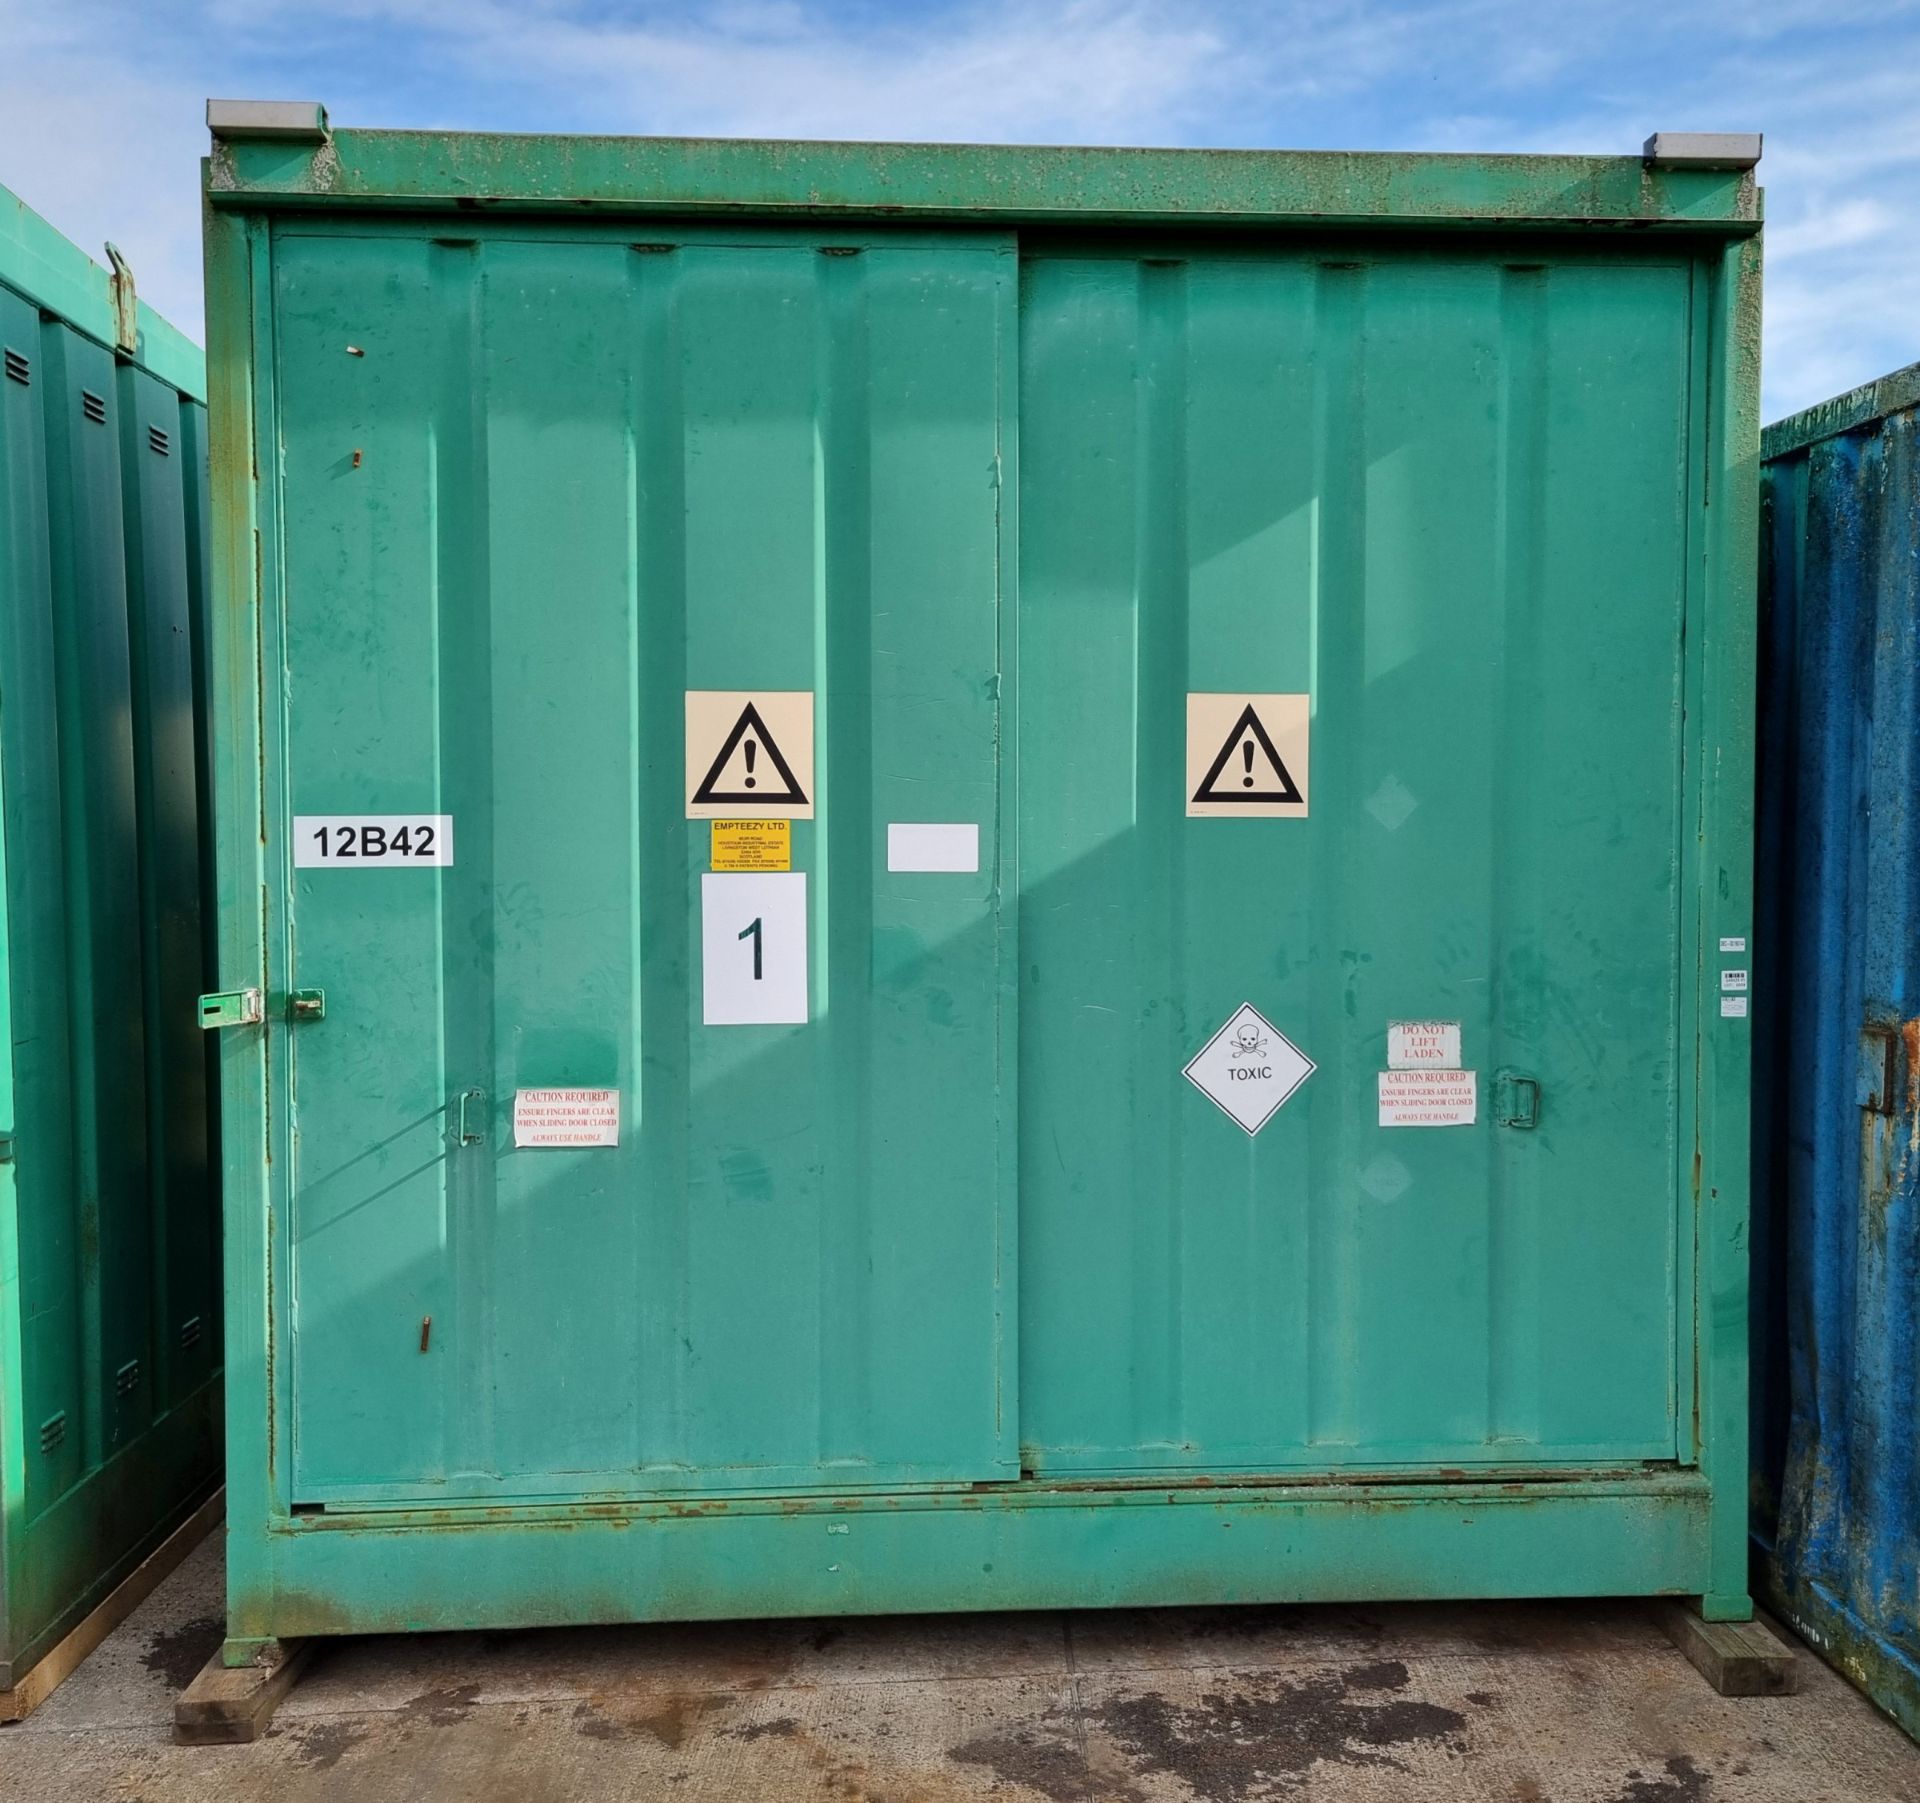 Empteezy ICB storage container - green - W 3050 x D 1500 x H 3000mm